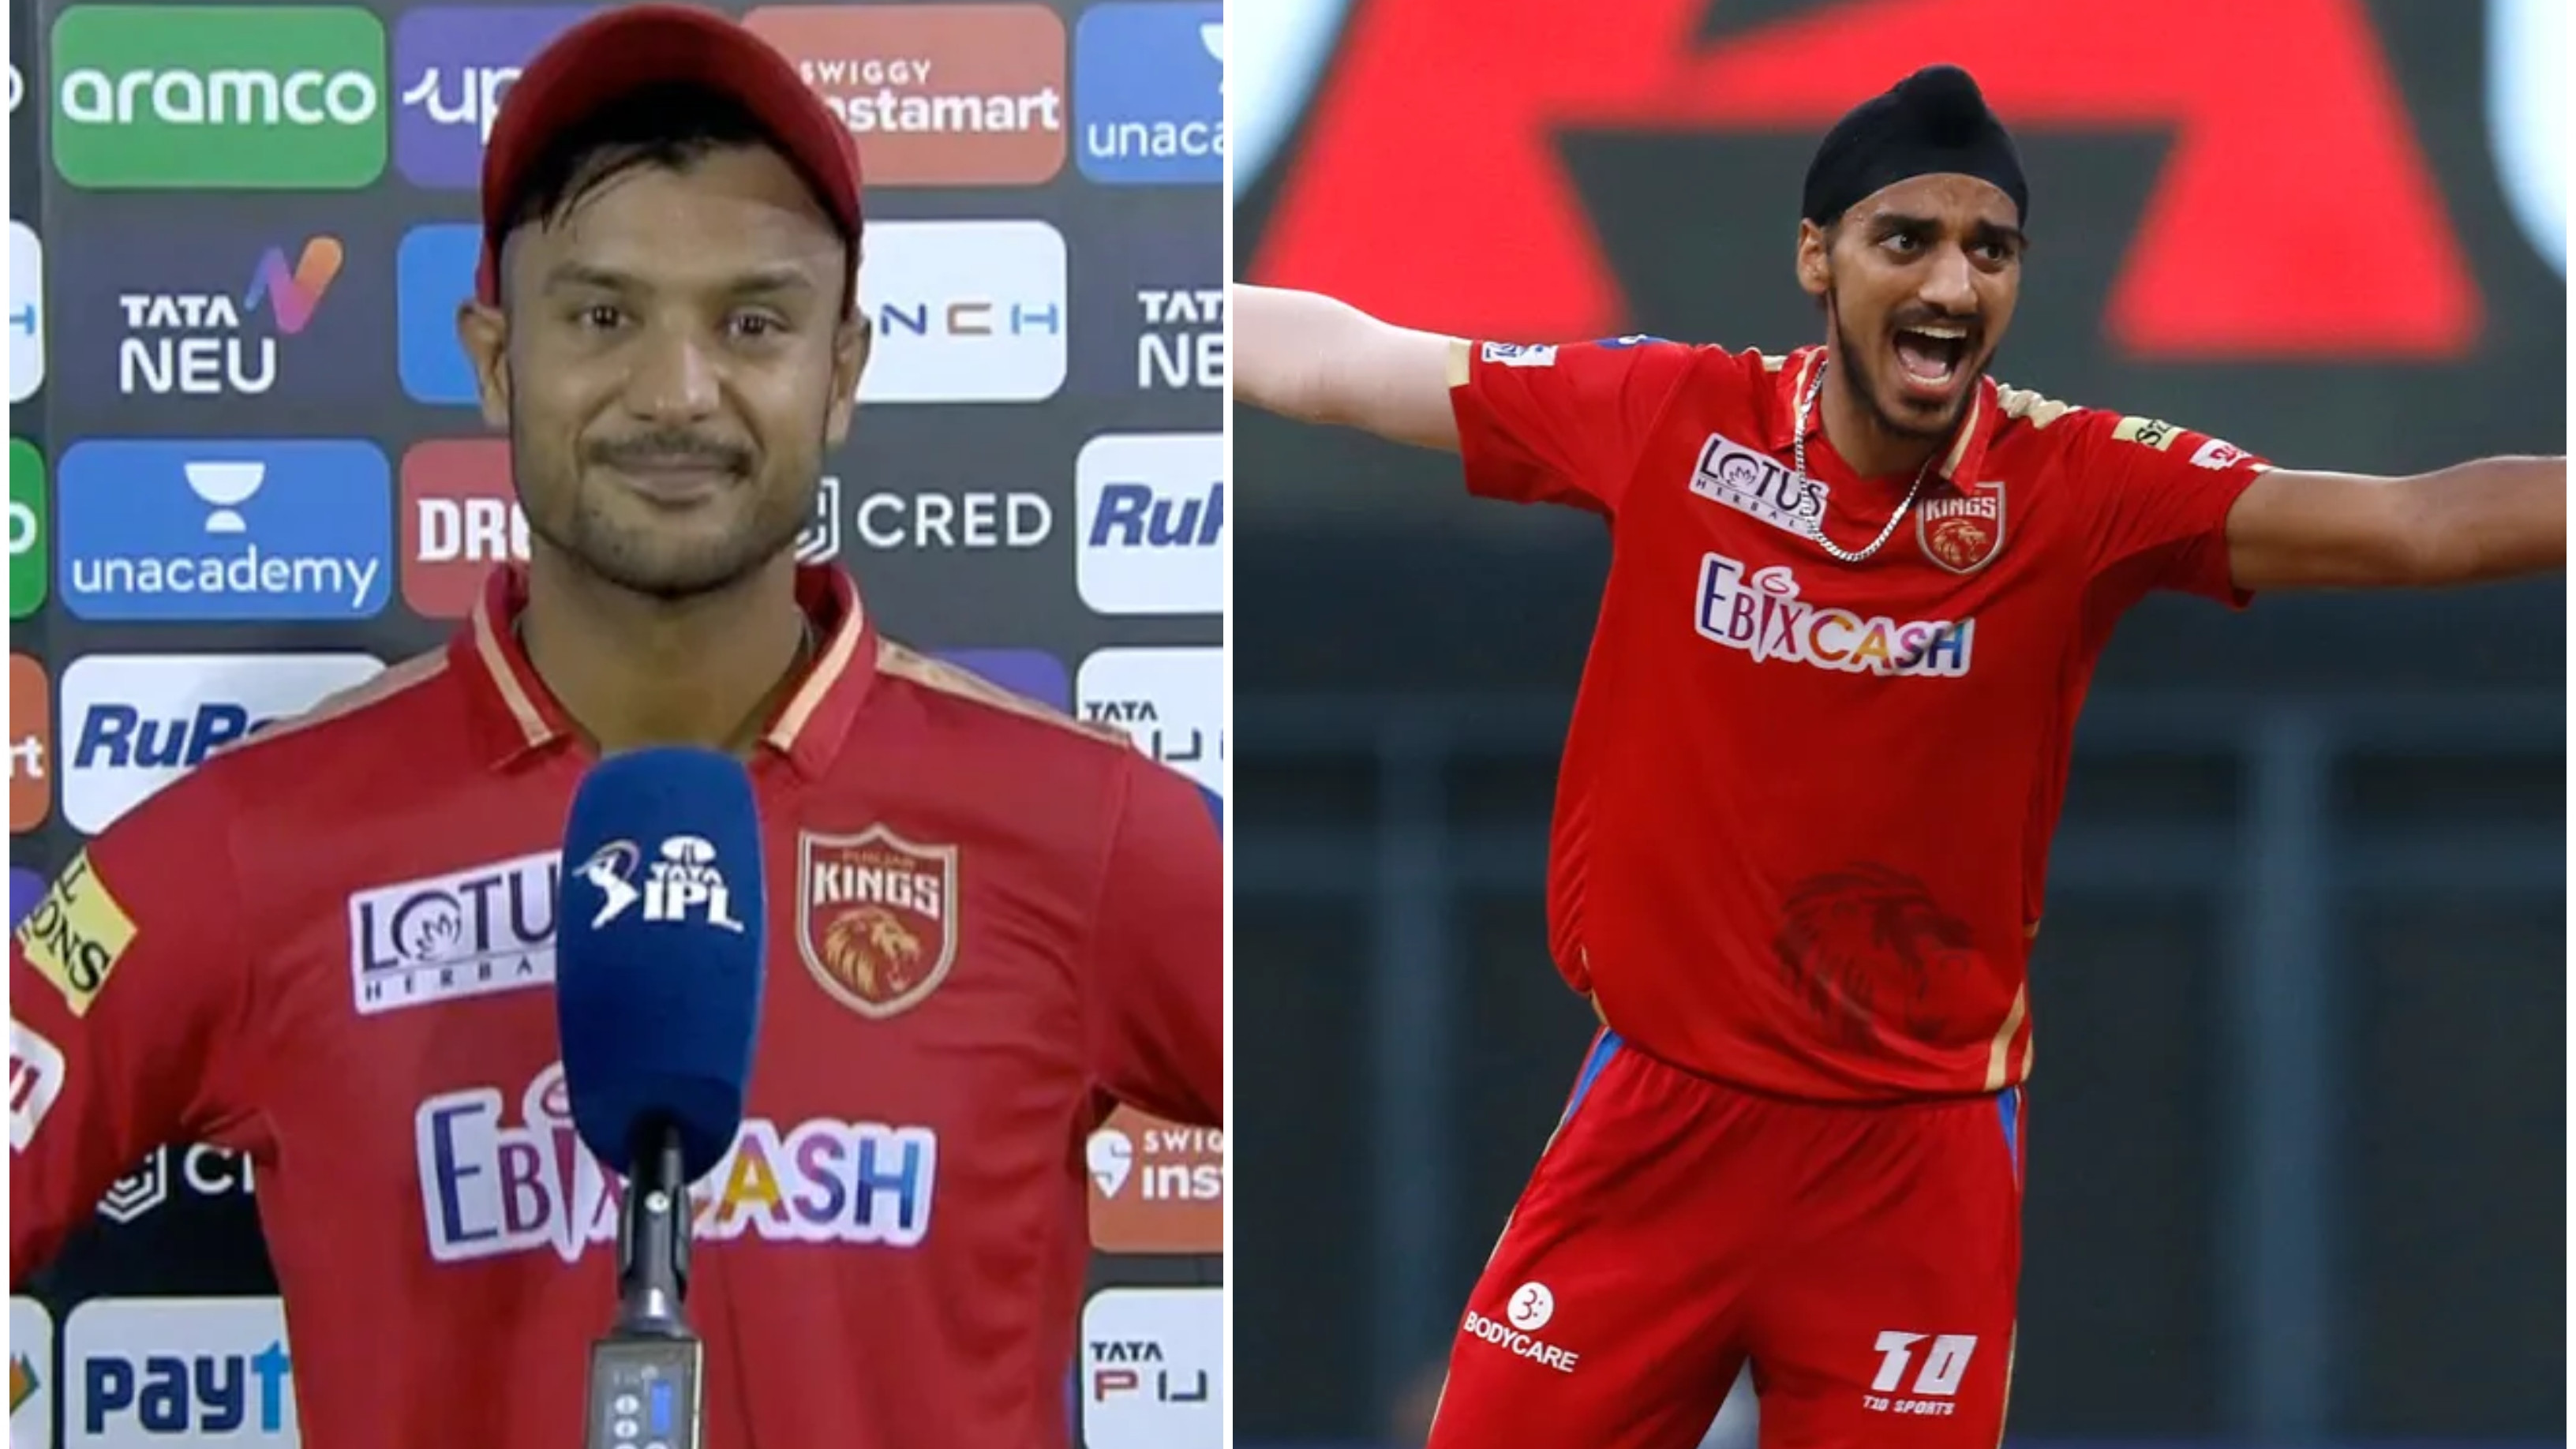 IPL 2022: “He has been a leader in the team”, Mayank Agarwal lauds PBKS’ young pacer Arshdeep Singh